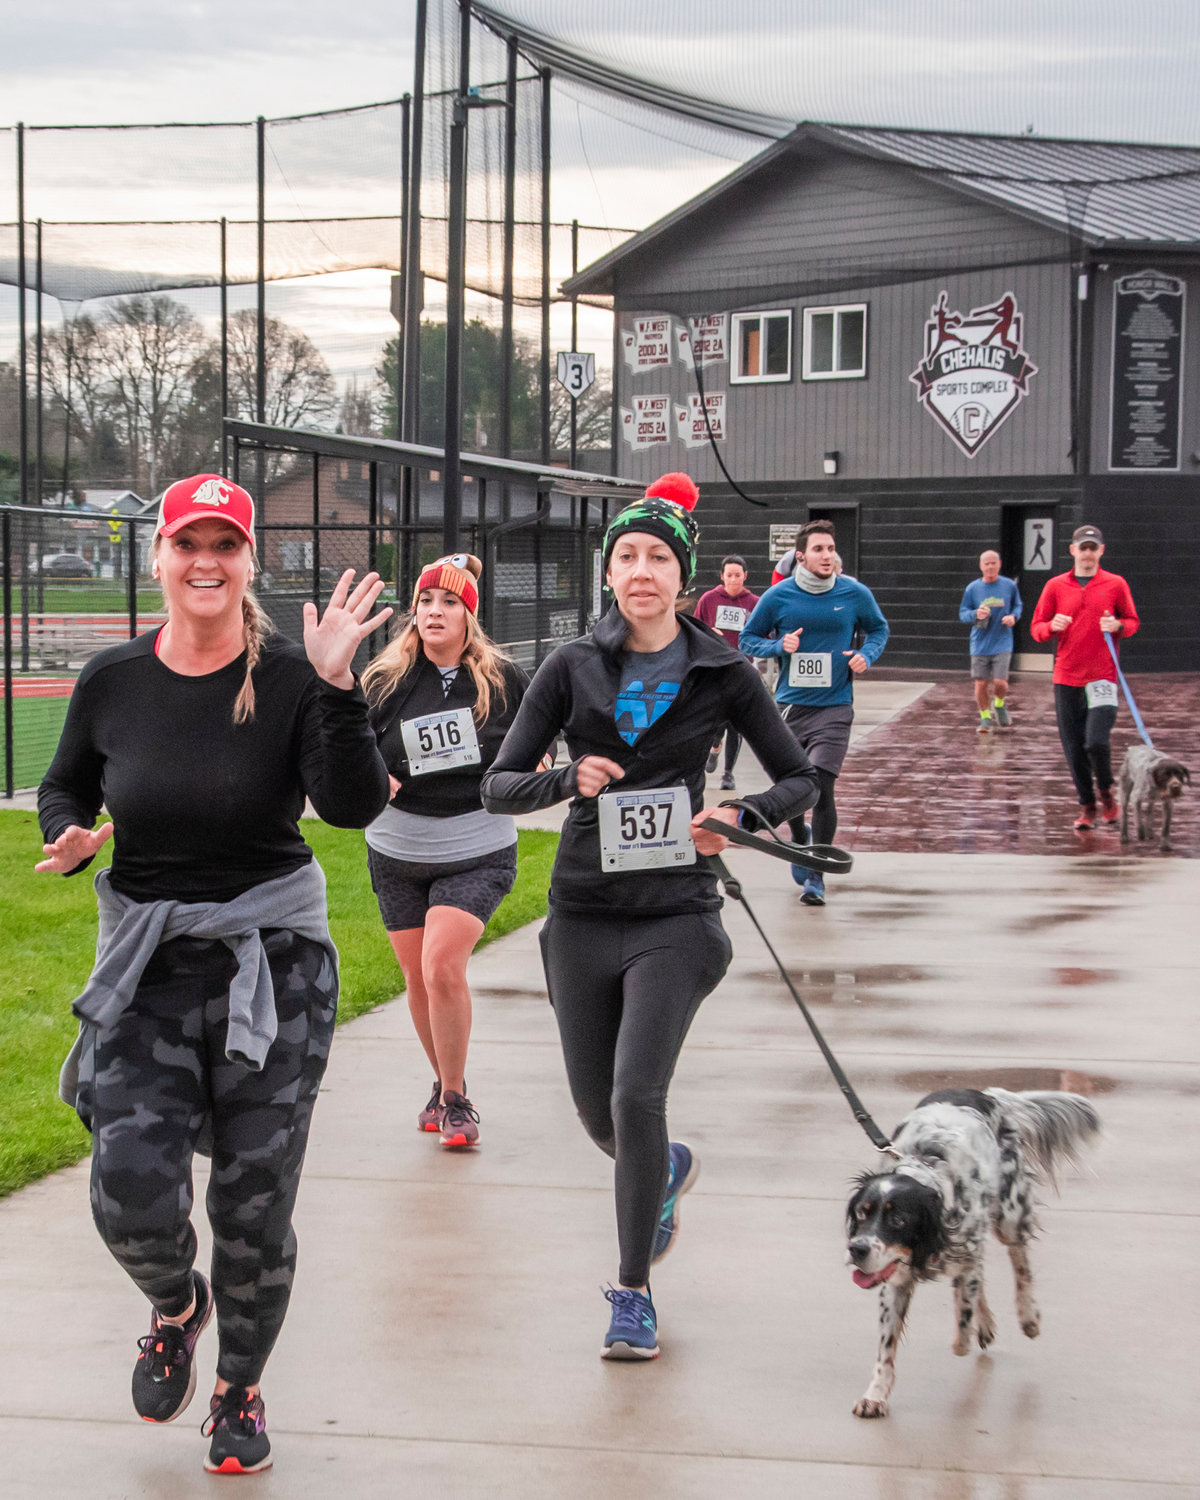 Runners smile and wave as they run through the Chehalis Sports Complex during a Turkey Trot 5K Thursday morning.